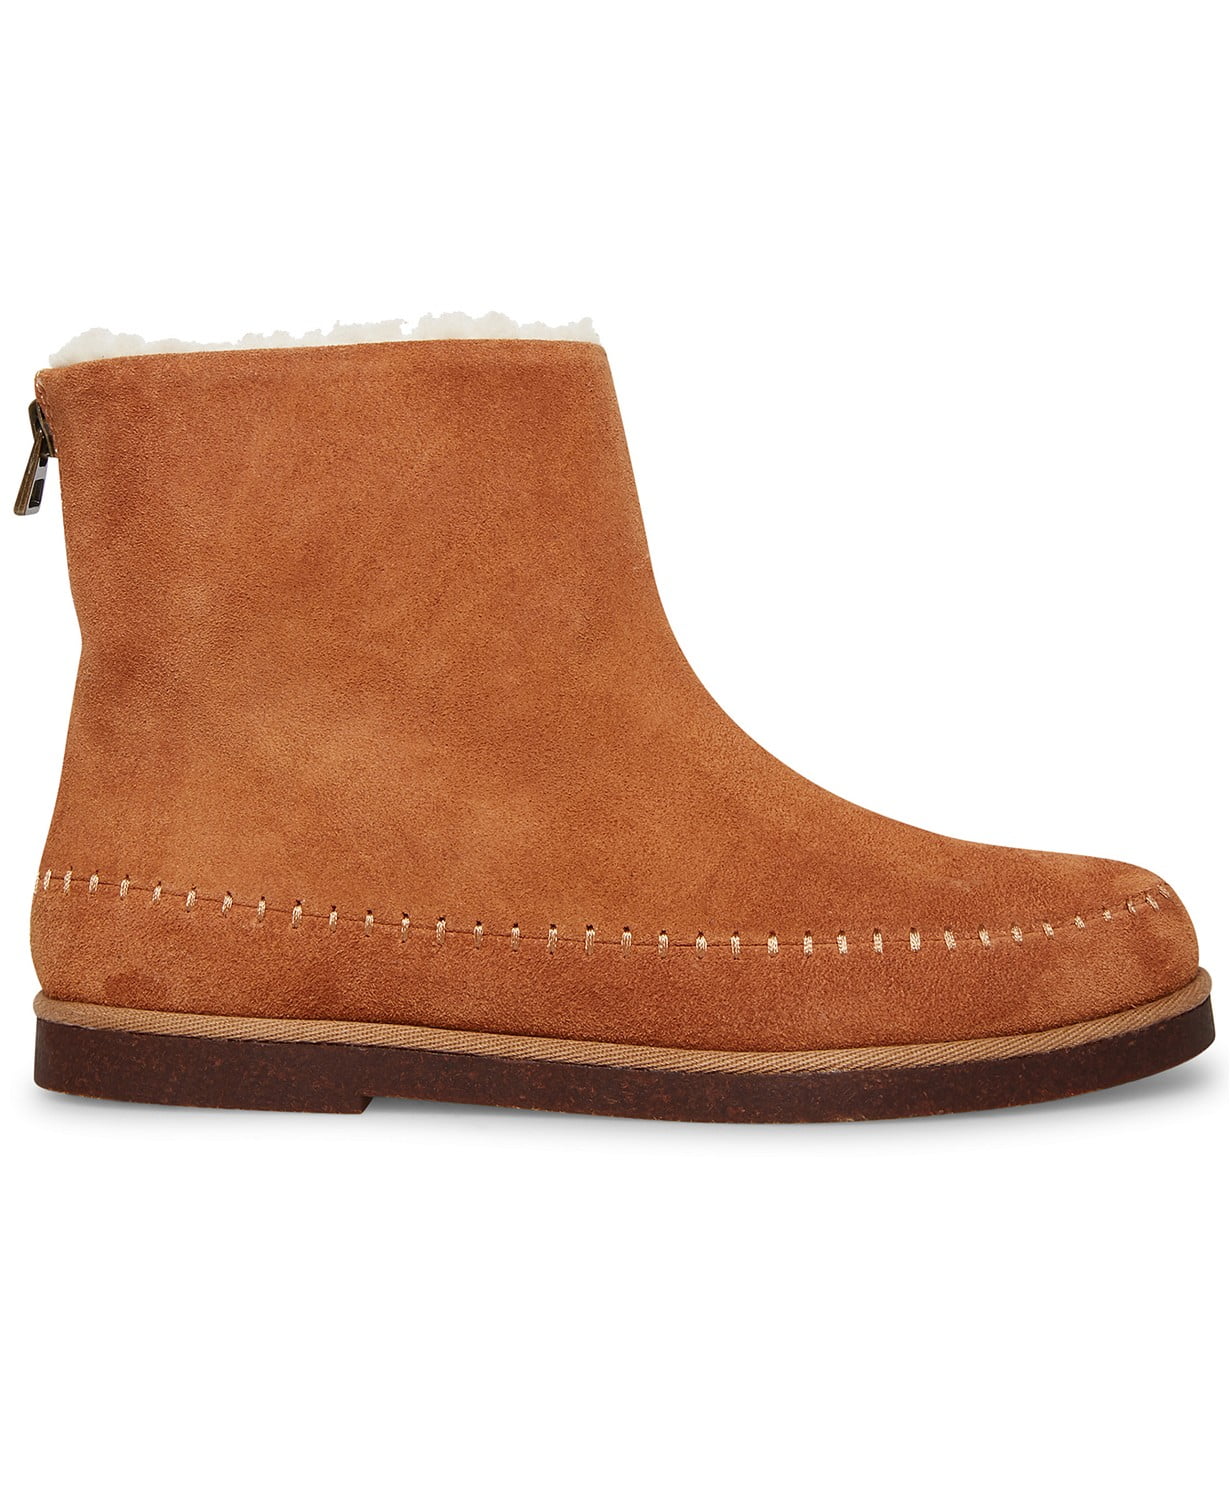 woocommerce-673321-2209615.cloudwaysapps.com-steve-madden-womens-brown-suede-tanzie-moc-toe-booties